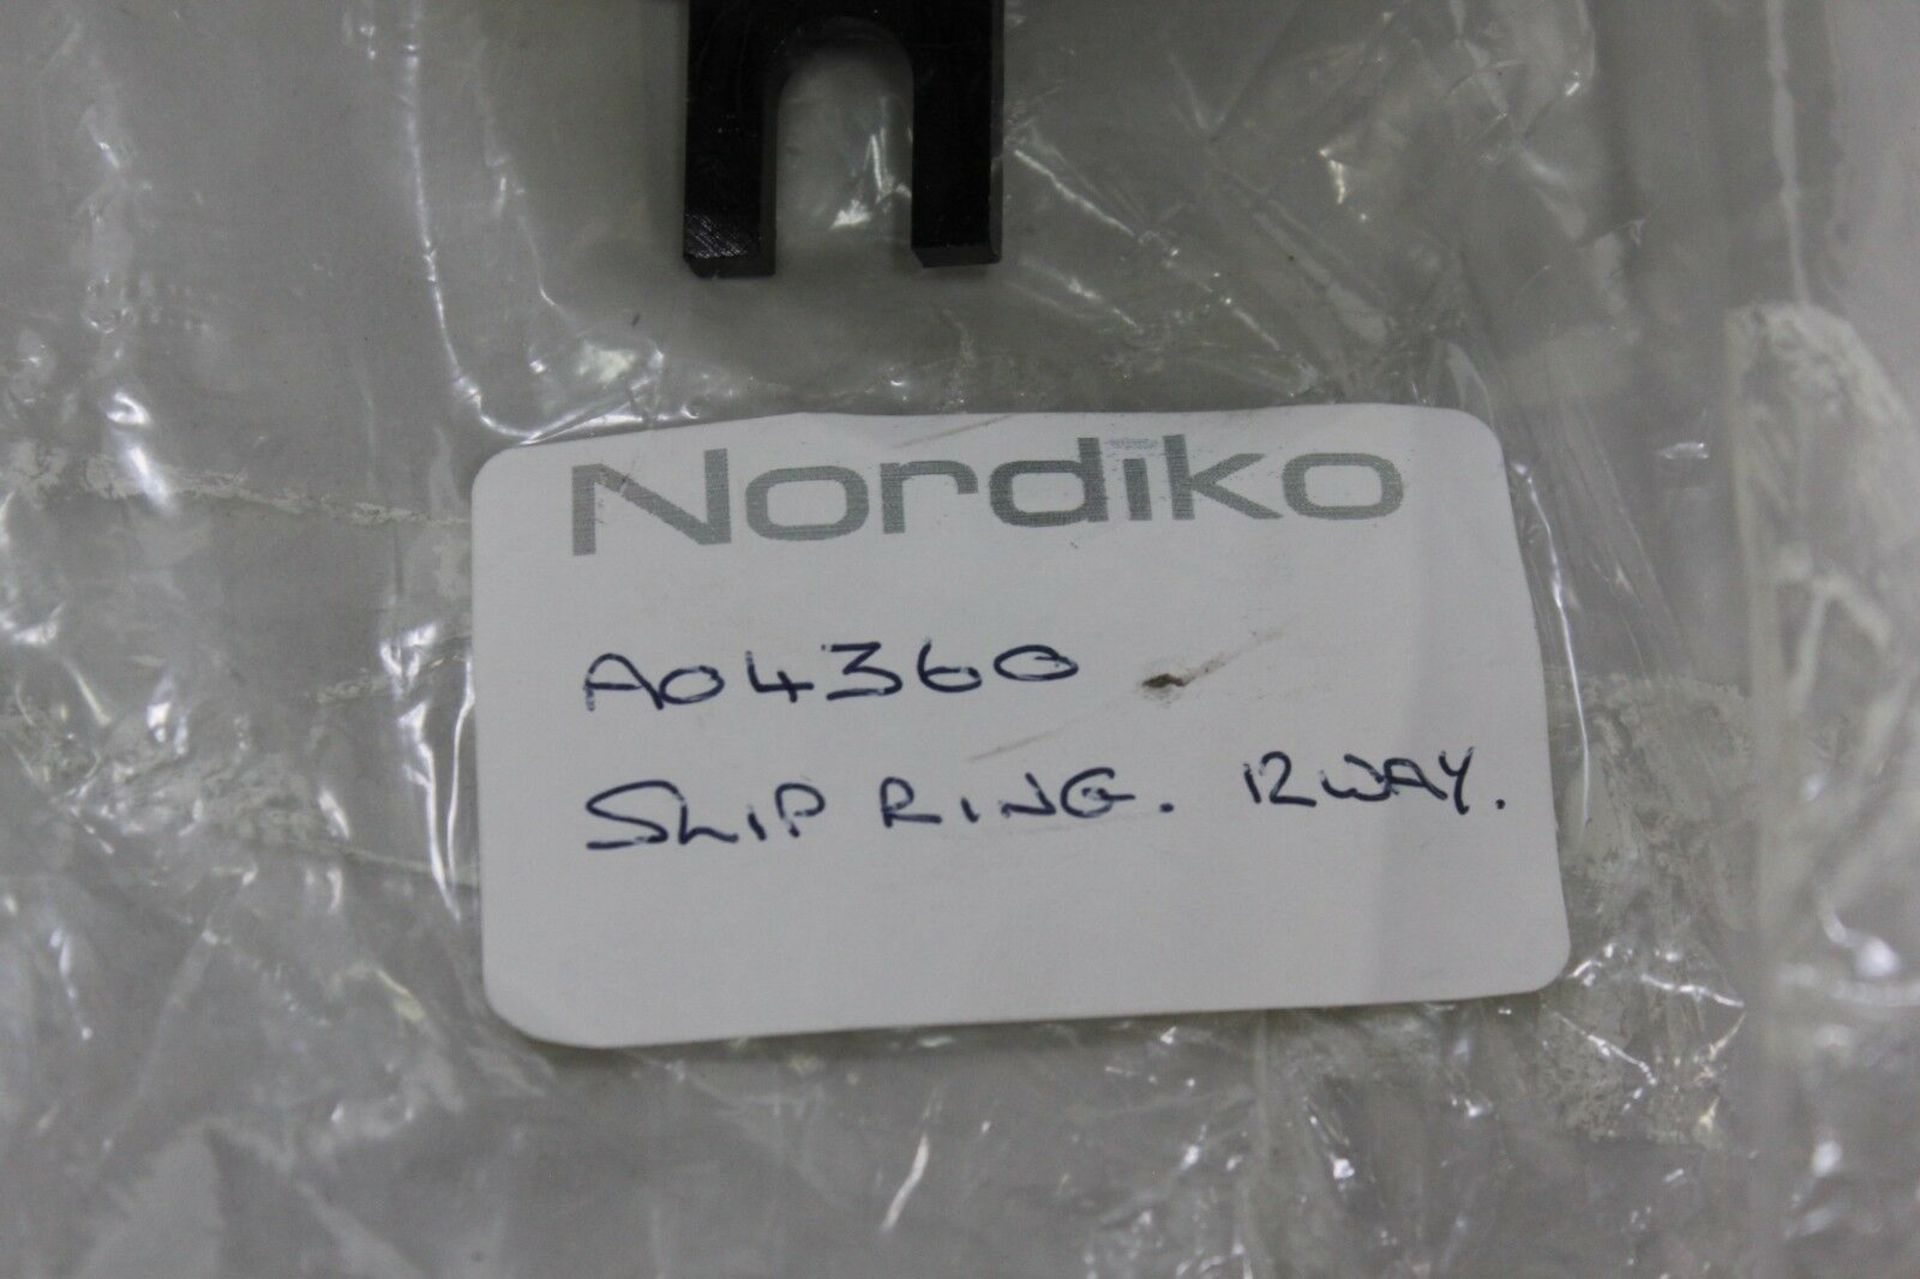 New Litton Poly Scientific 12 Way Slip Ring Slipring Assembly - Image 2 of 5